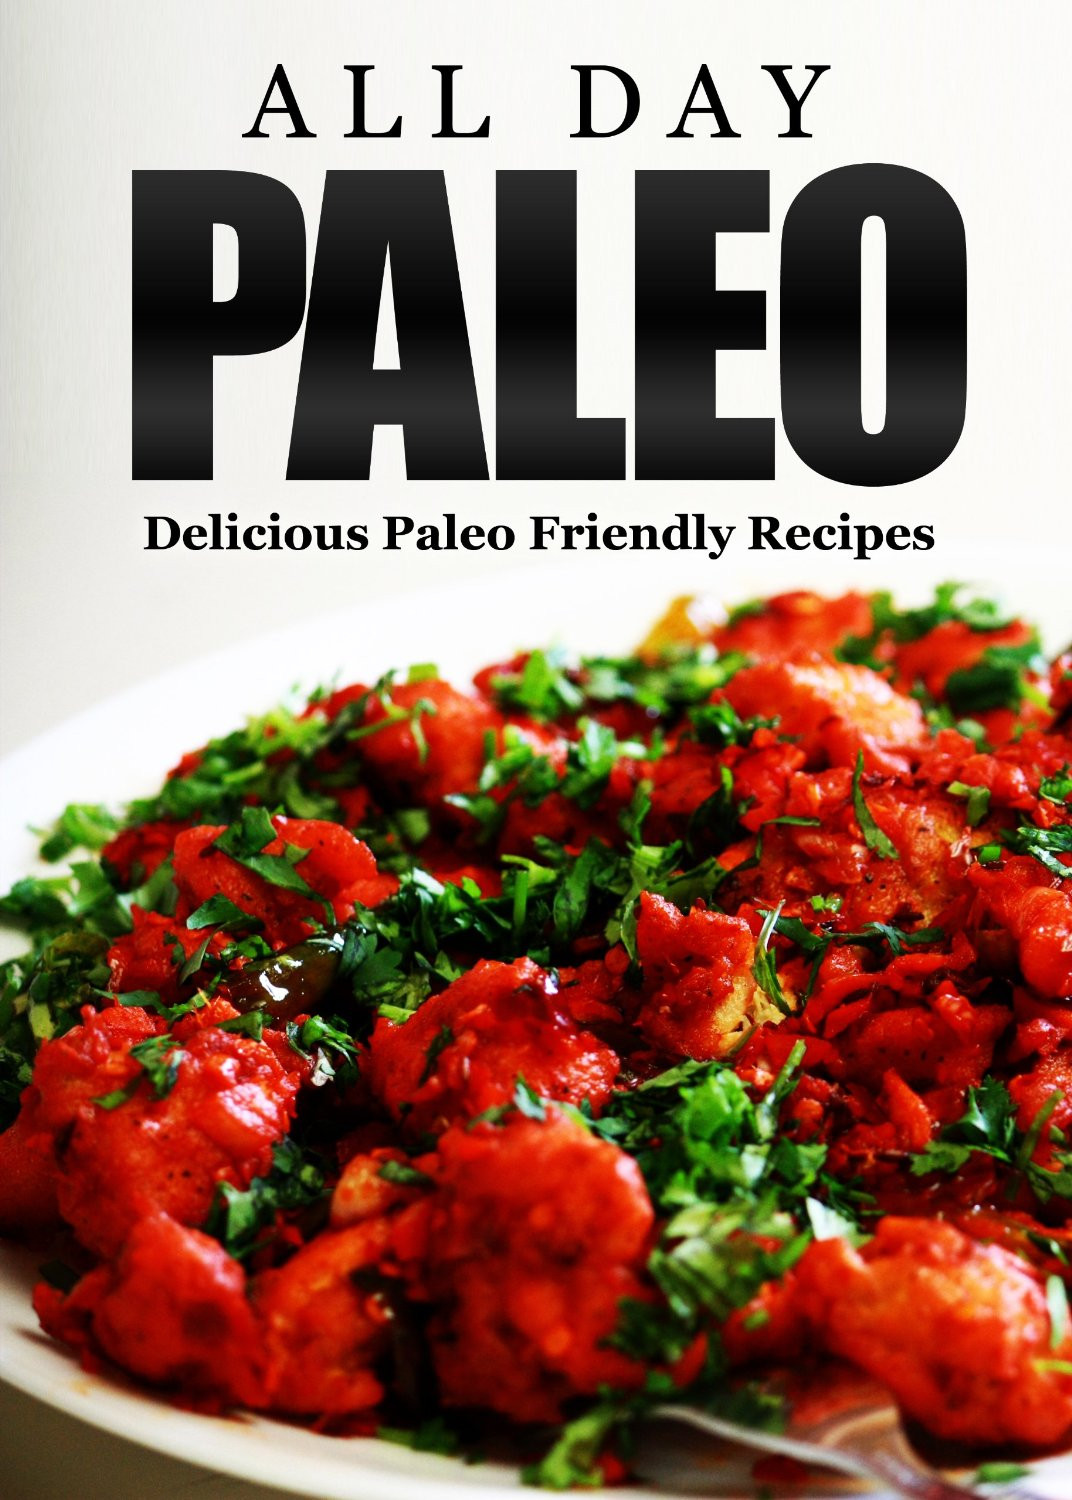 Free Paleo Diet
 Get Started on the Paleo Diet – 100’s of Recipes & Free eBooks